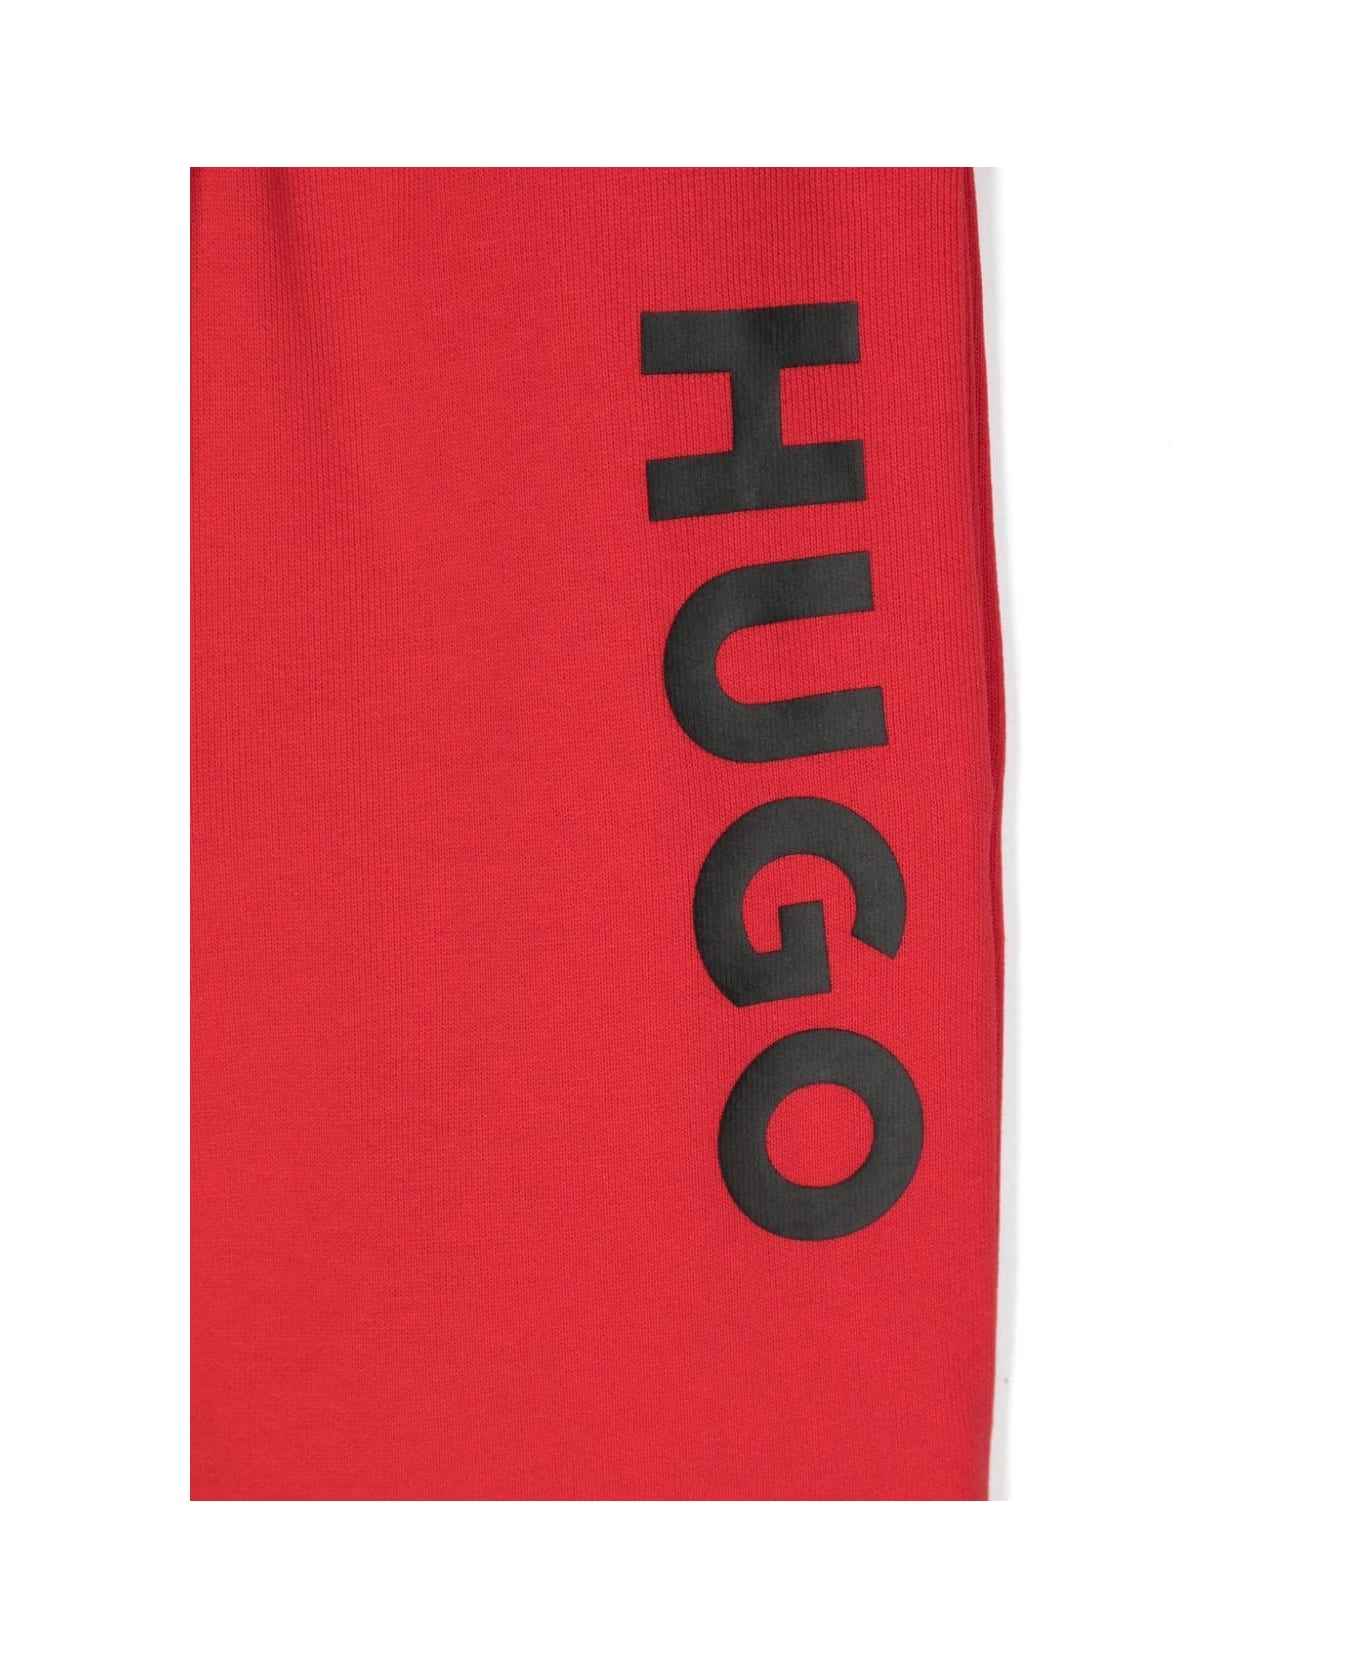 Hugo Boss Sports Shorts With Print - Red